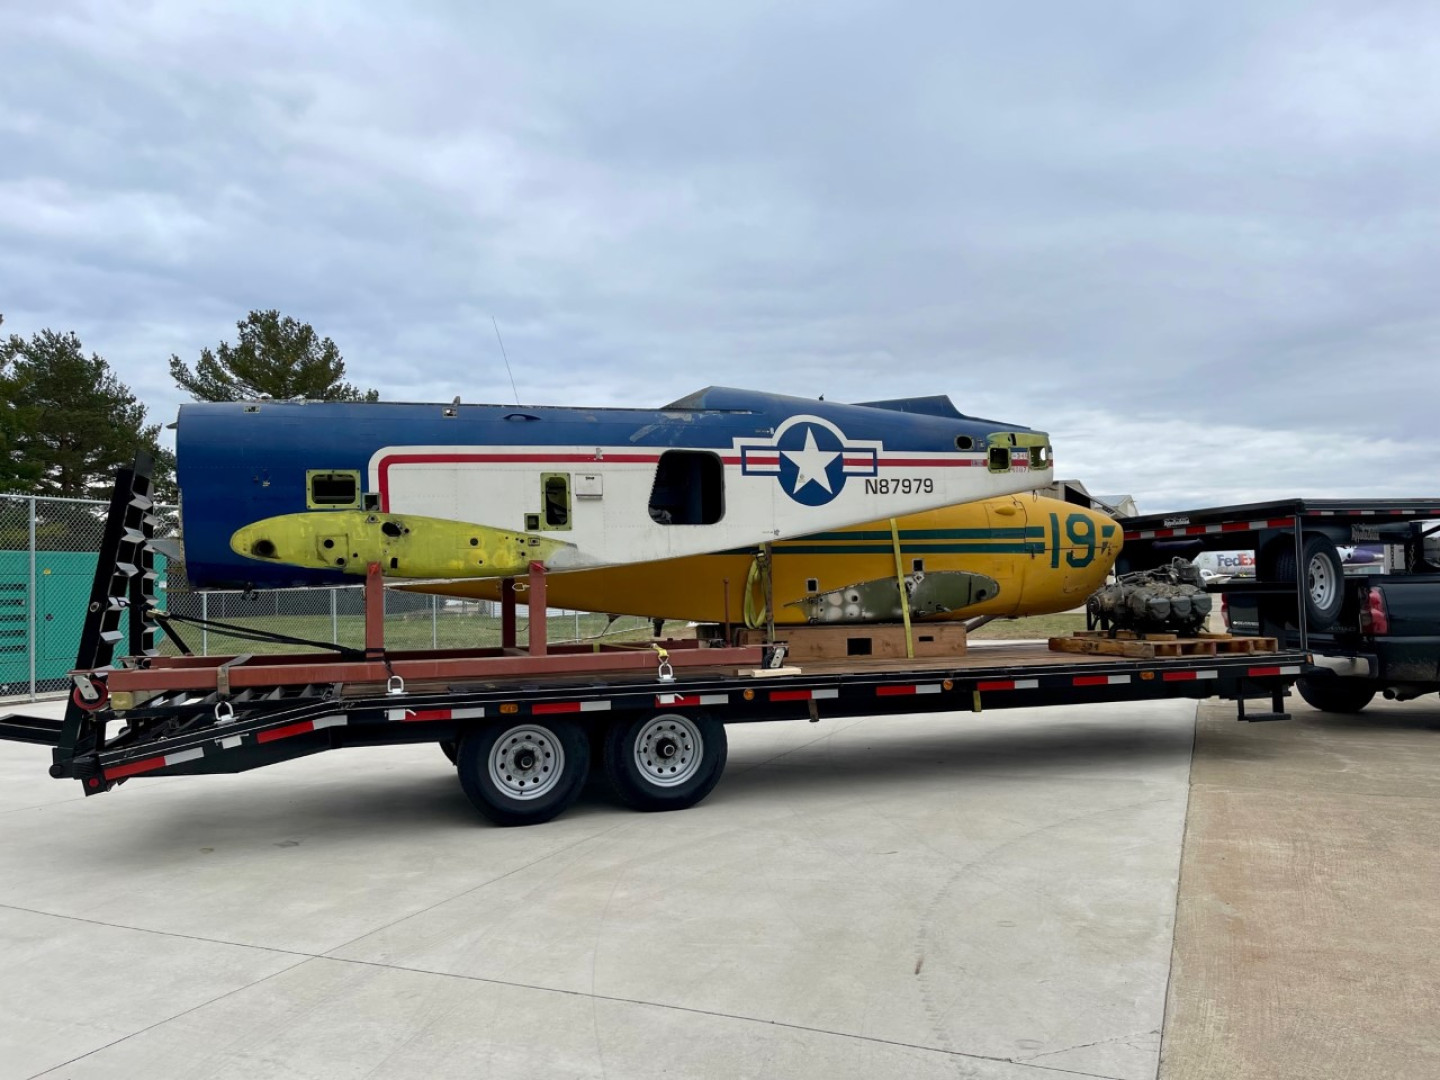 The bodies of two small planes sit on a truck bed.